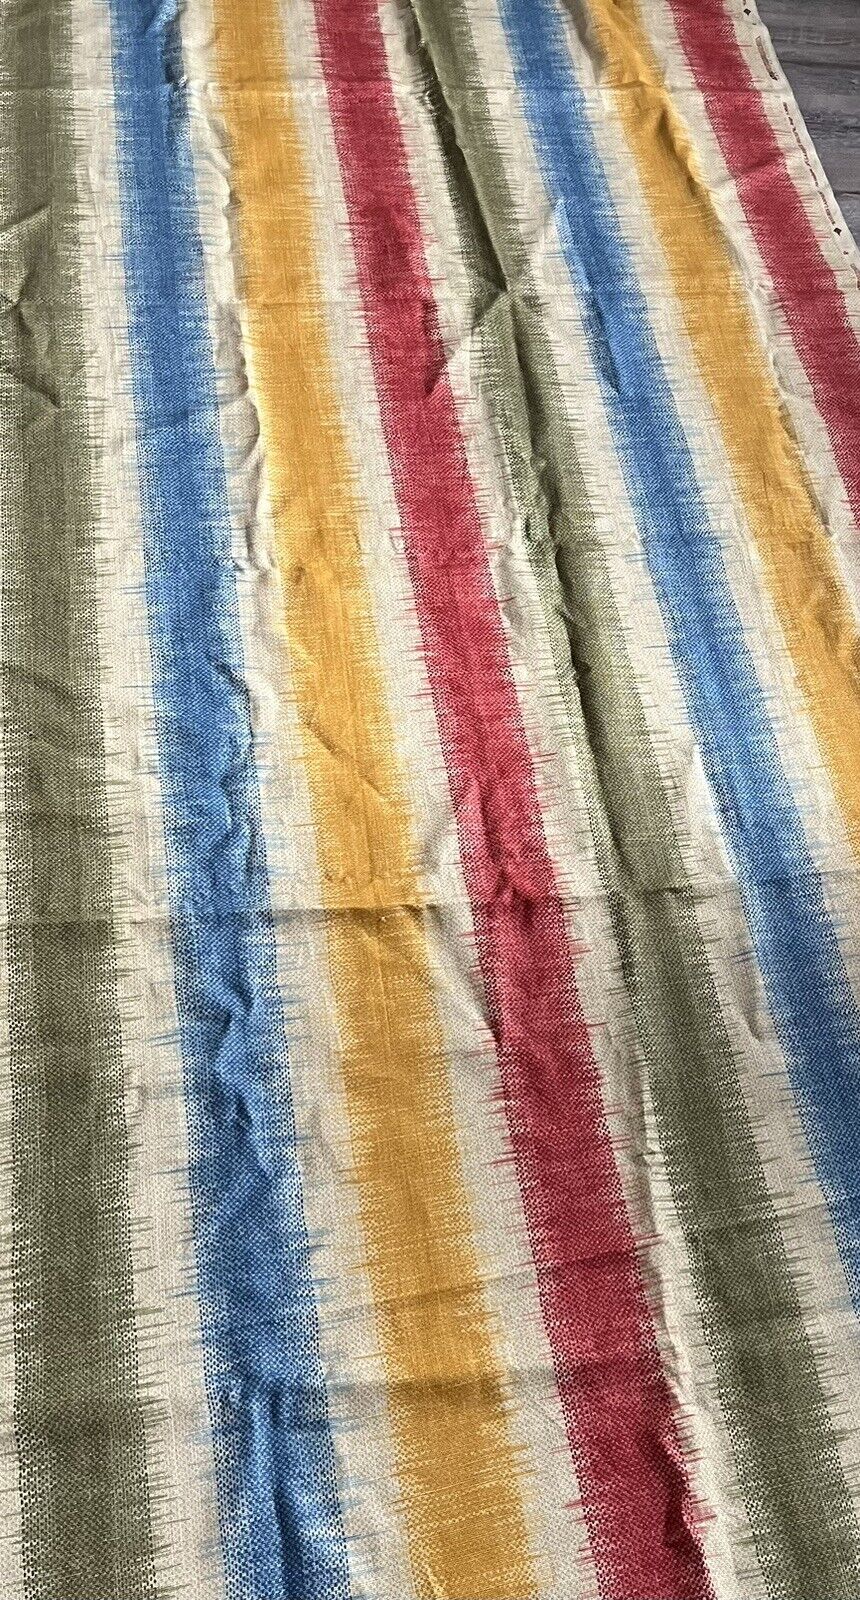 VTG EXCLUSIVE CLARENCE HOUSE WOOVEN RAYURES LANNION FABRIC STRIPED 1YD